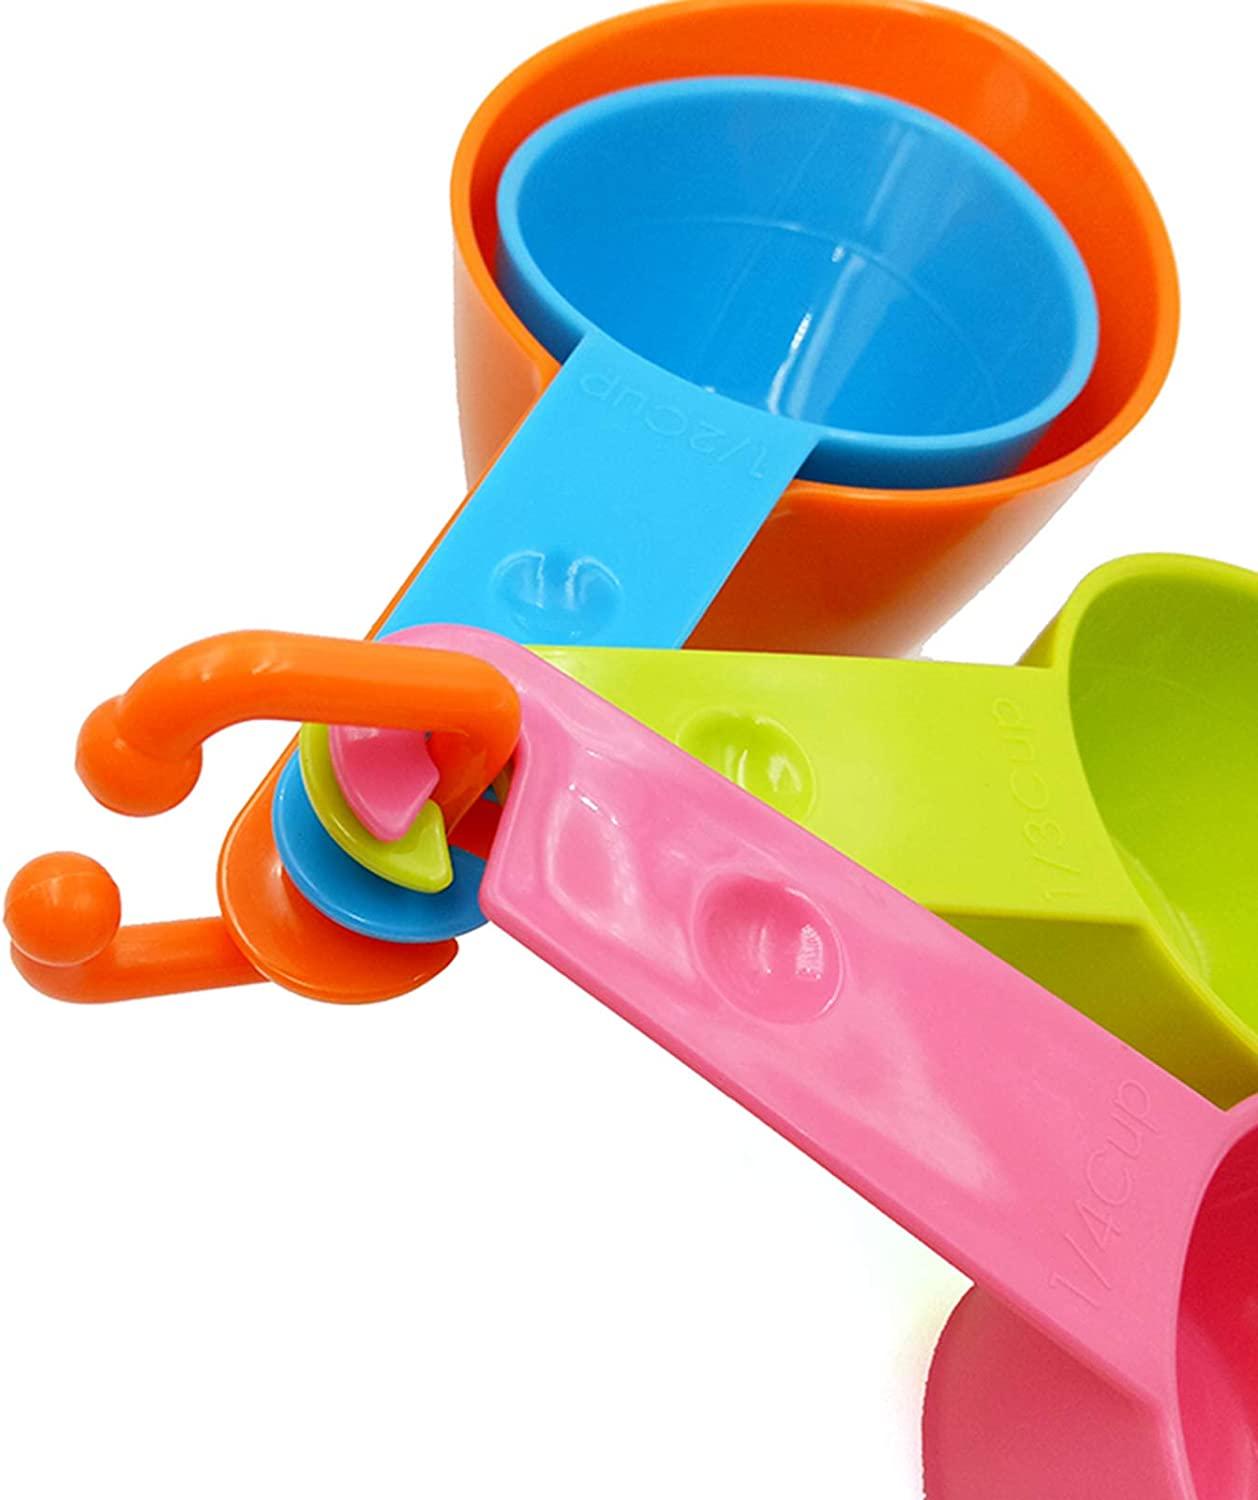 Rypet Pet Food Scoop - Measuring Cups and Spoons Set Plastic for Dog, Cat  and Bird Food (Random Color) Set of 4